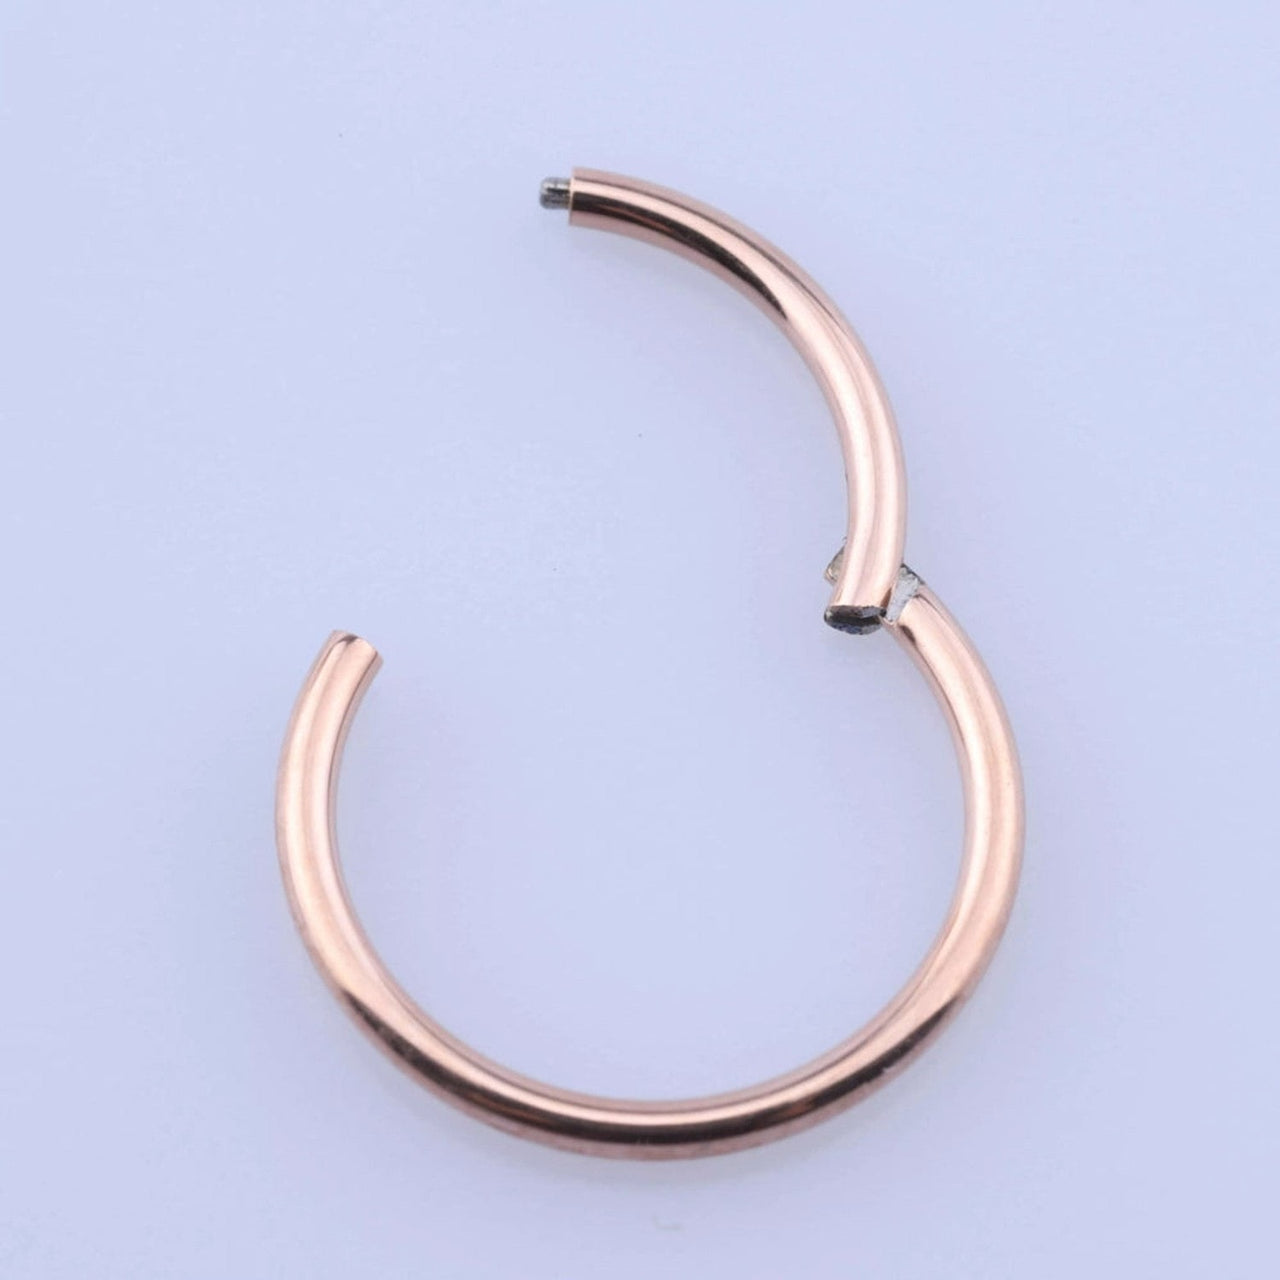 20G 18G 16G 14G Gold Color Plated on Surgical Steel HINGED Segment Nose  Ring Septum Clicker Ring Daith Hoop - Etsy